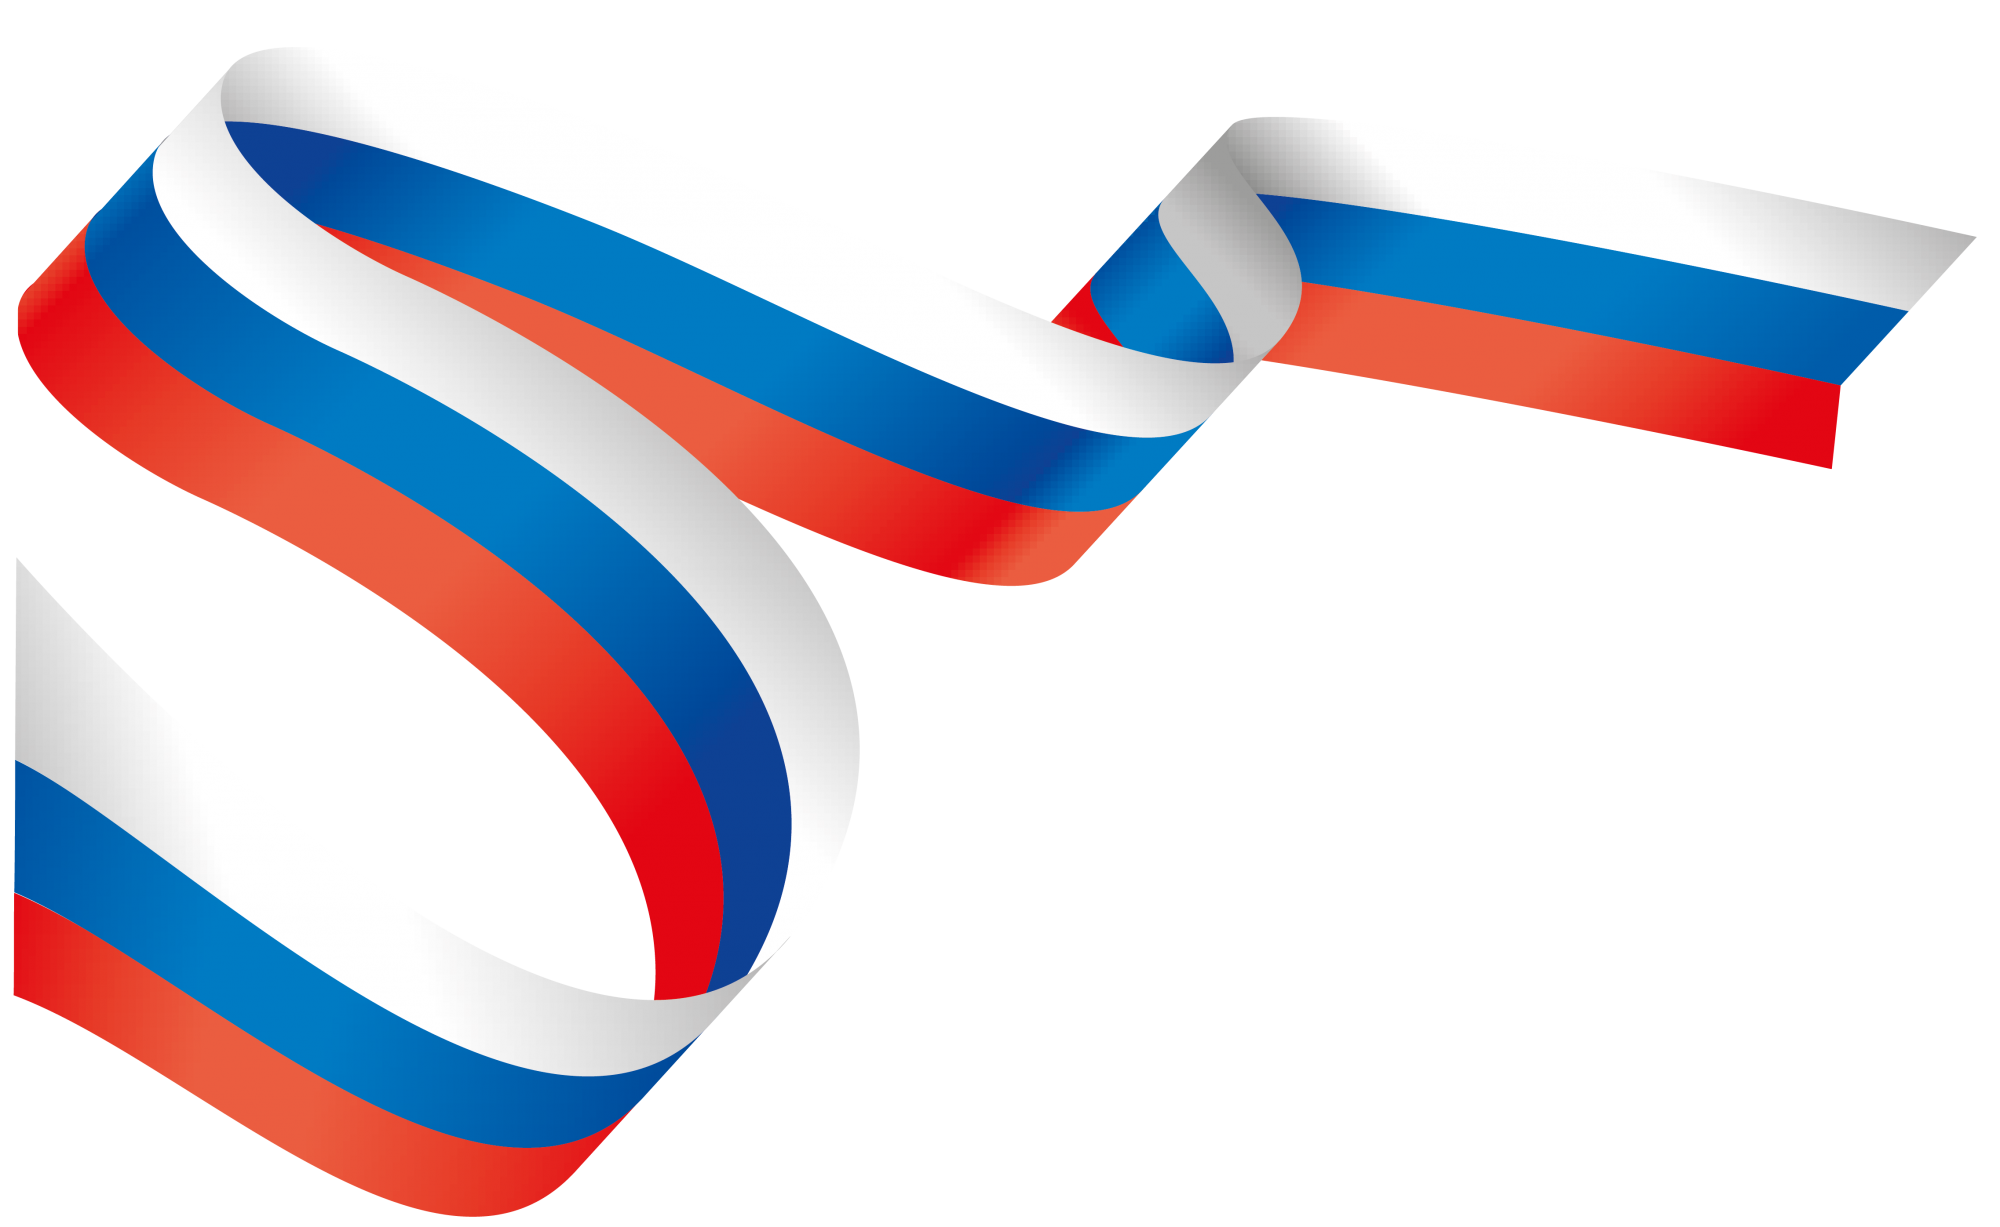 kisspng-tolyatti-novyy-flag-of-russia-russia-5ab927e6f11c36.5285927515220838149876.png